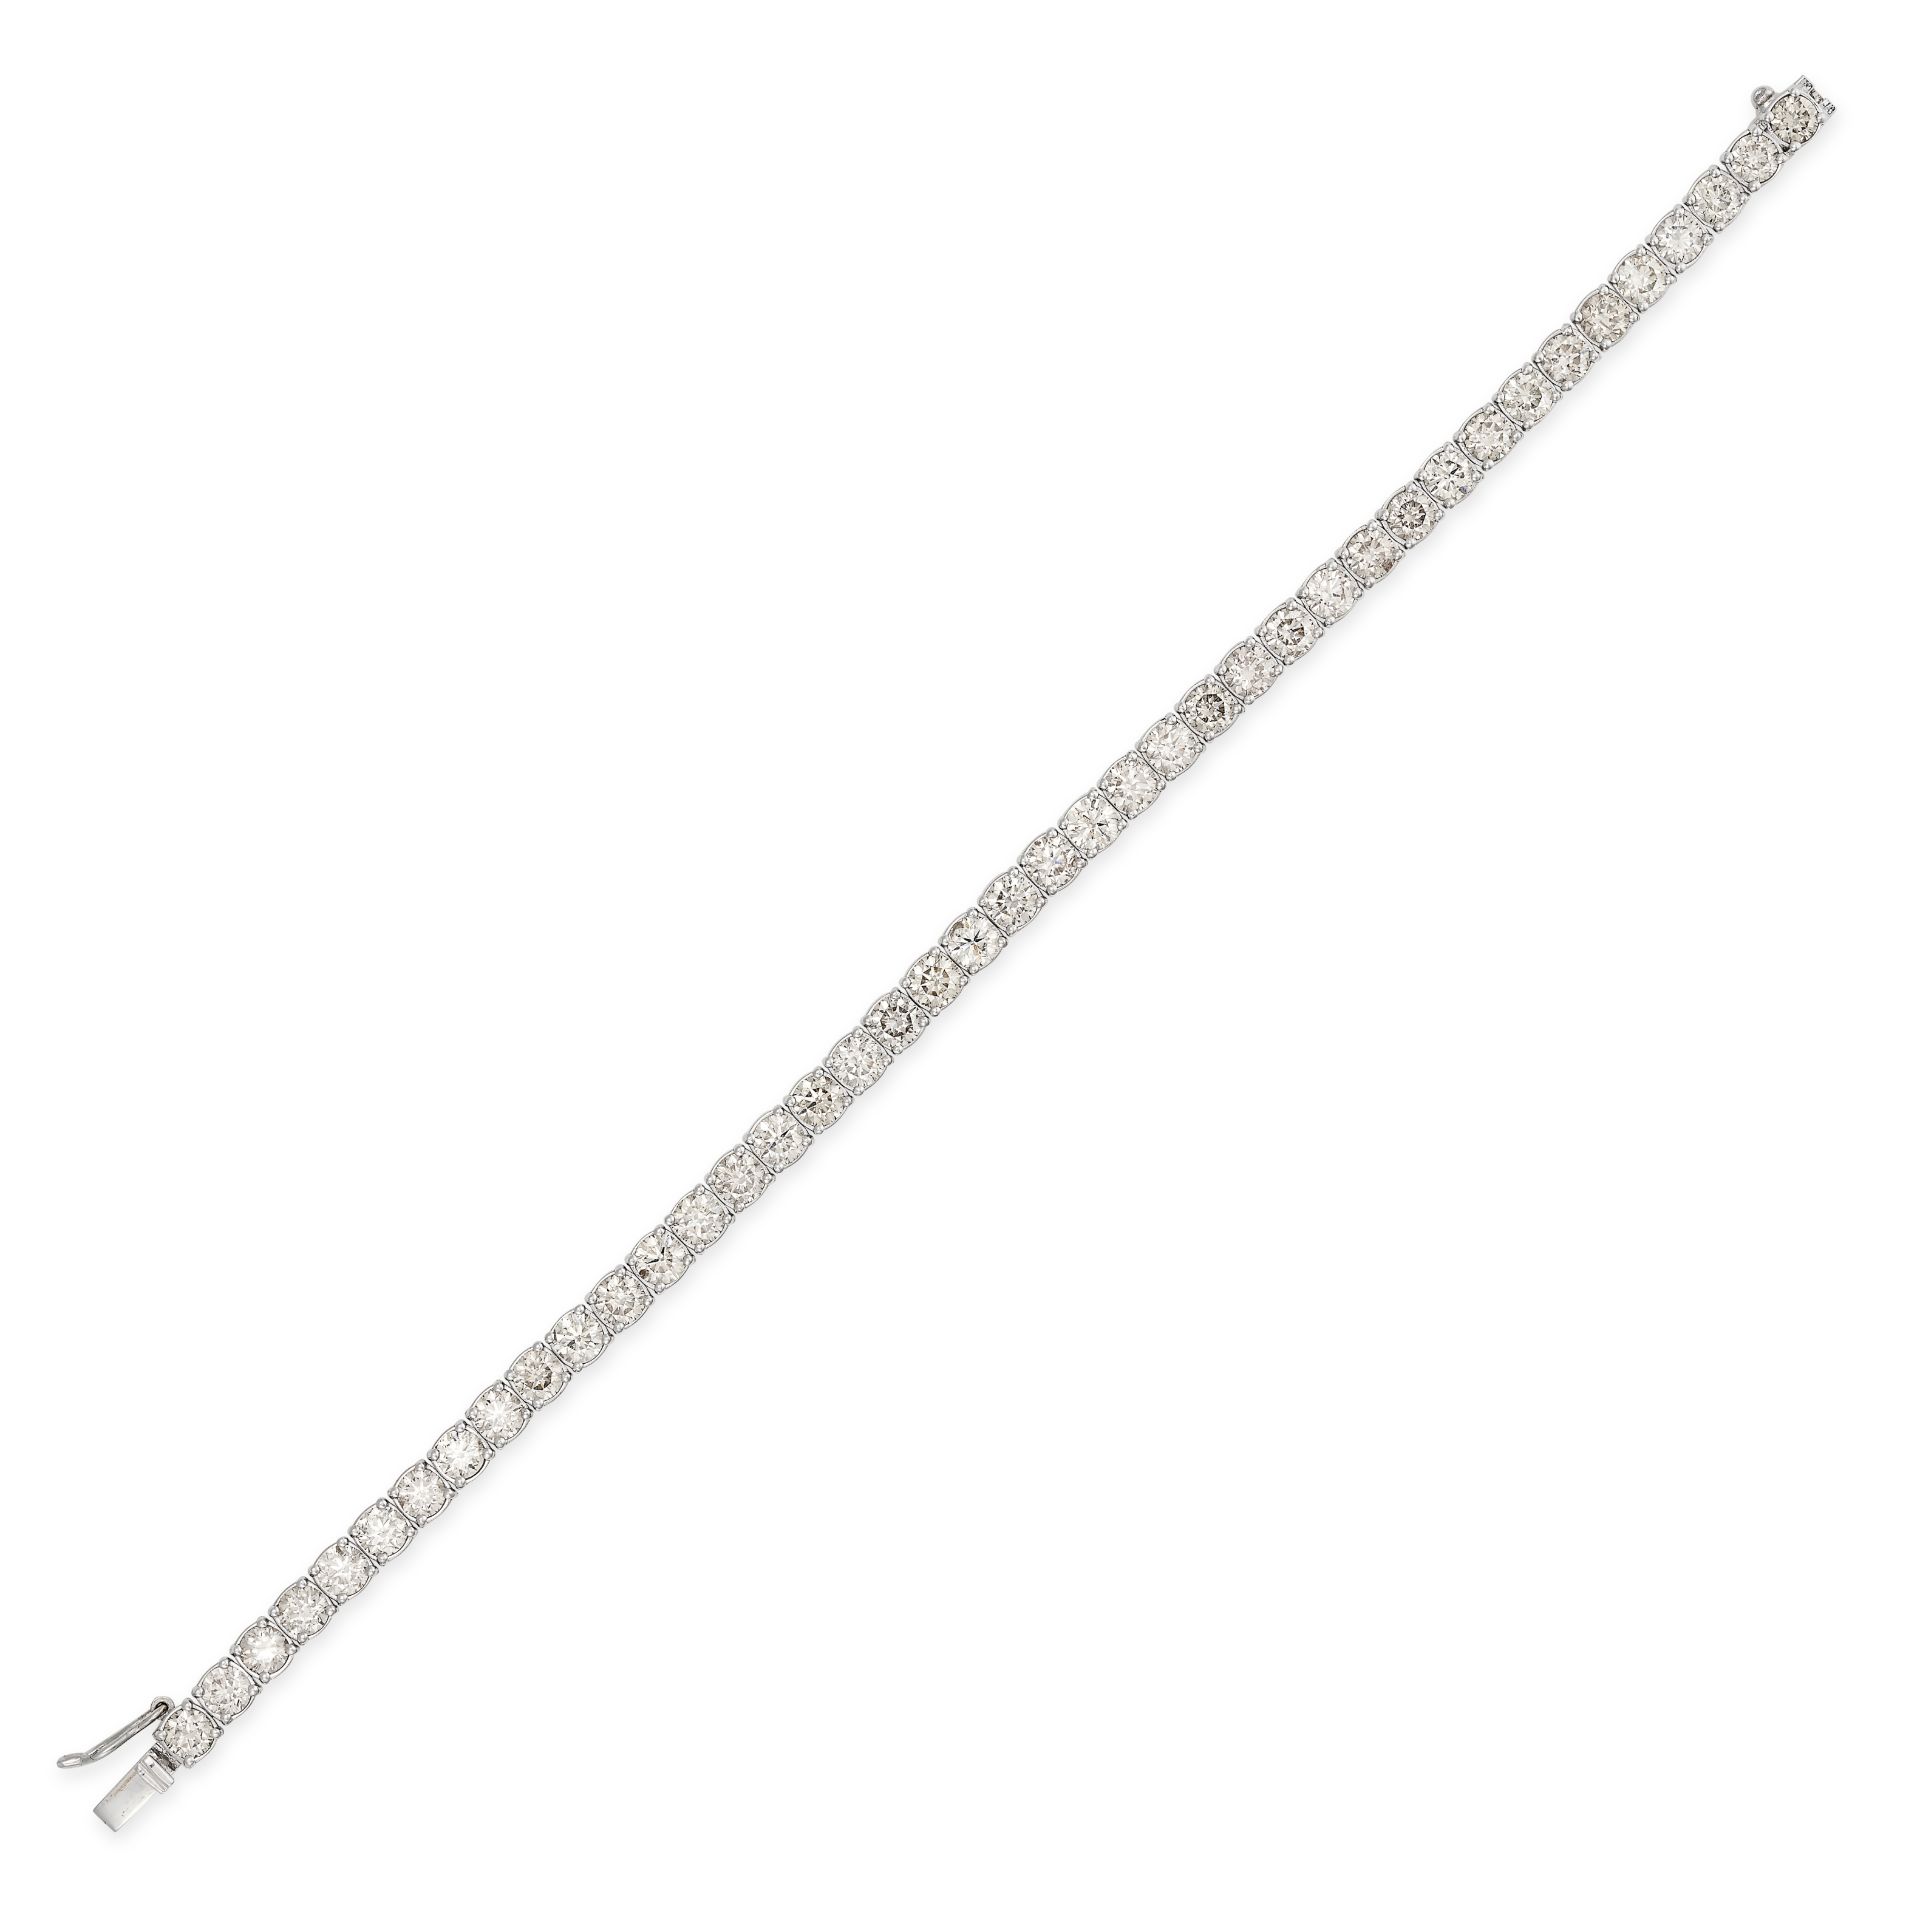 A 9.75 CARAT DIAMOND LINE BRACELET in 18ct white gold, set with a row of forty two round brilliant